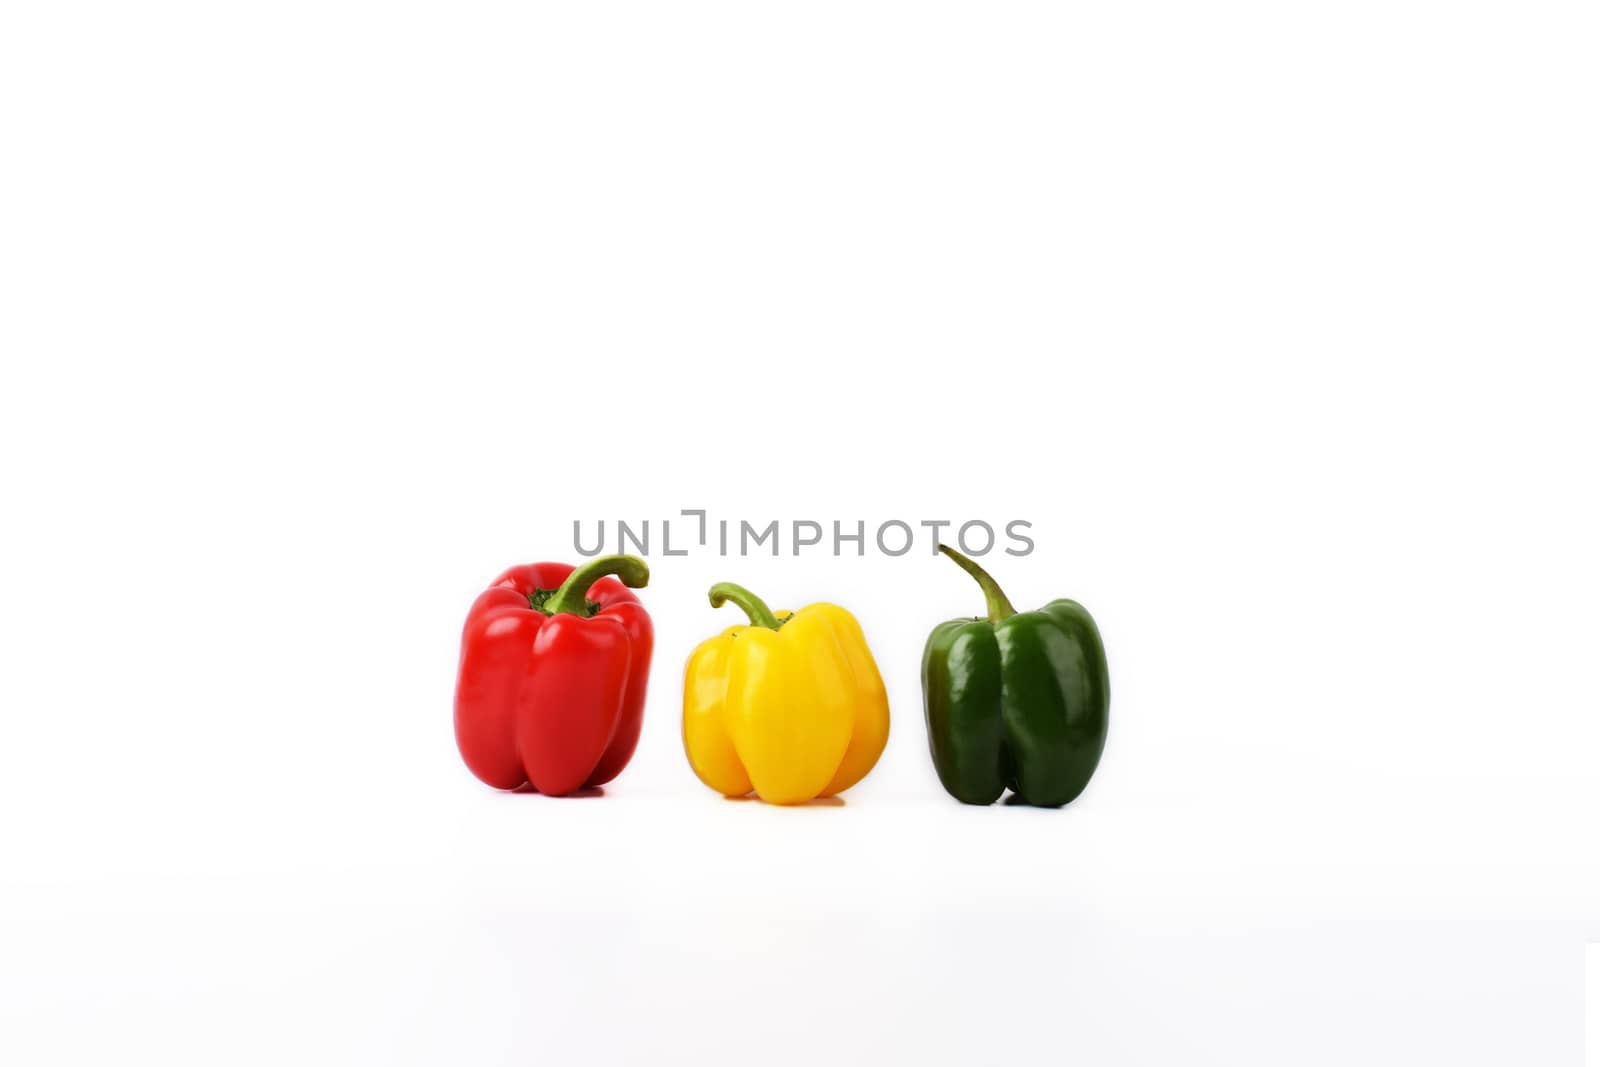 Mock up objects isolated on white background, front view